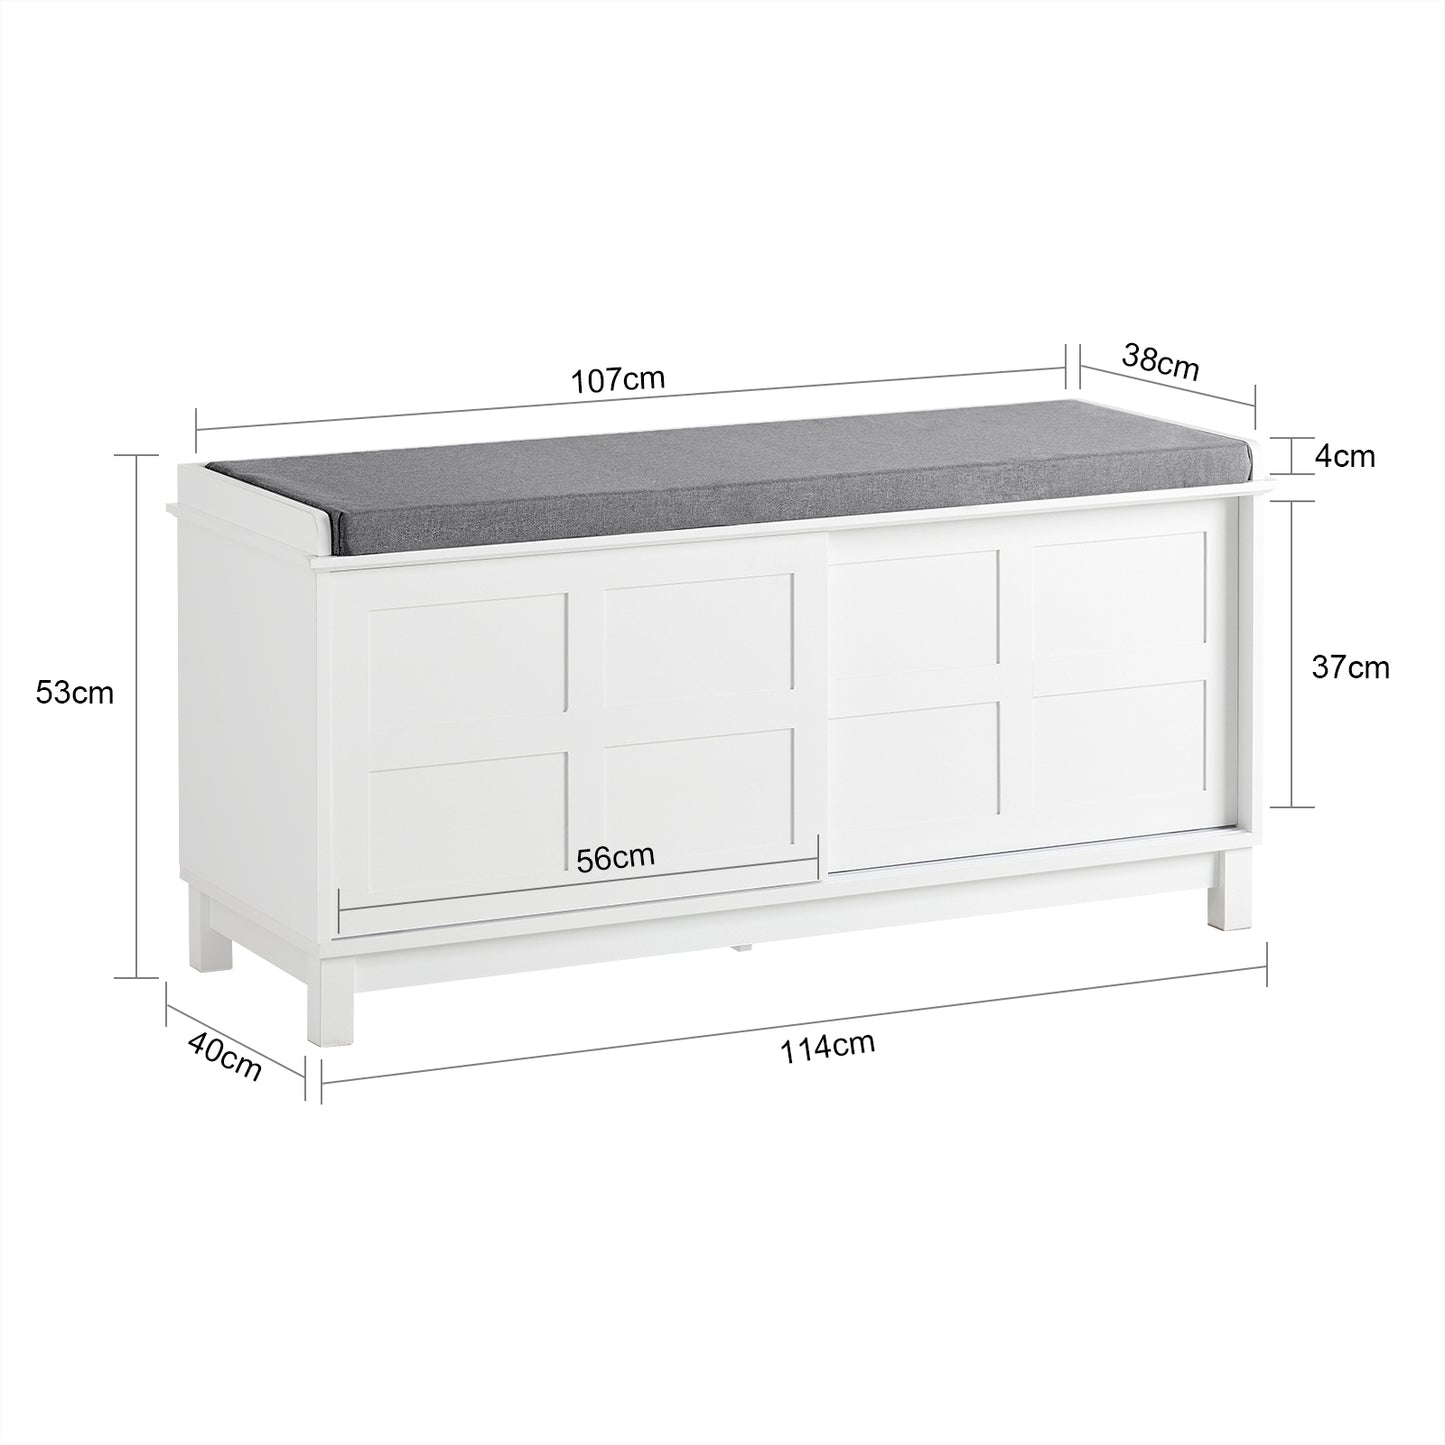 SoBuy FSR86-W Entryway Shoe Bench Shoe Cabinet Shoe Rack with with 2 Sliding Doors and Seat Cushion